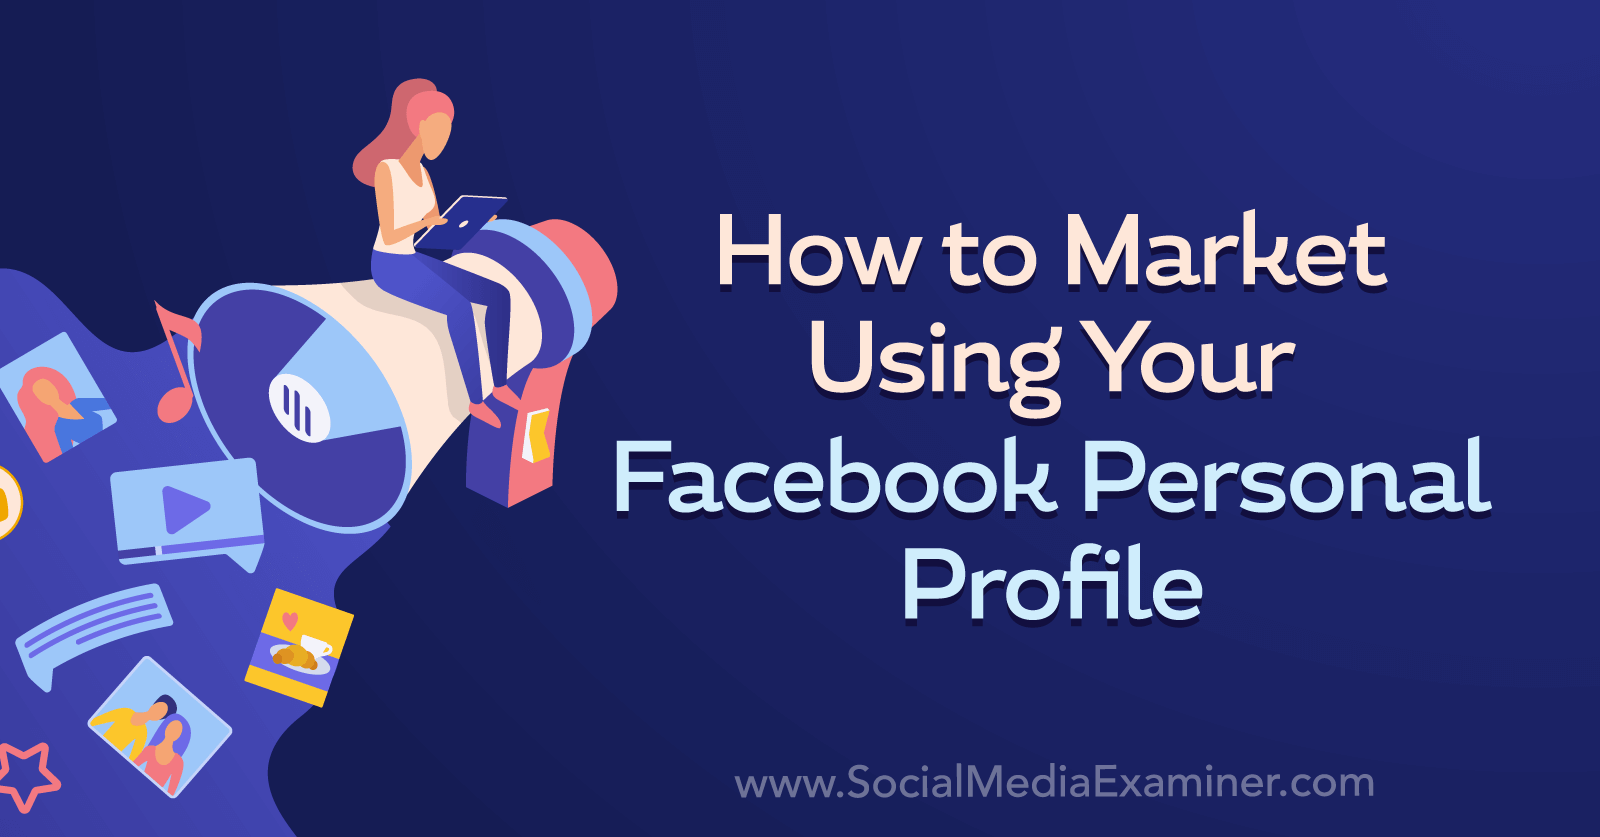 How to Market Using Your Facebook Personal Profile by Nick Wolny on Social Media Examiner.